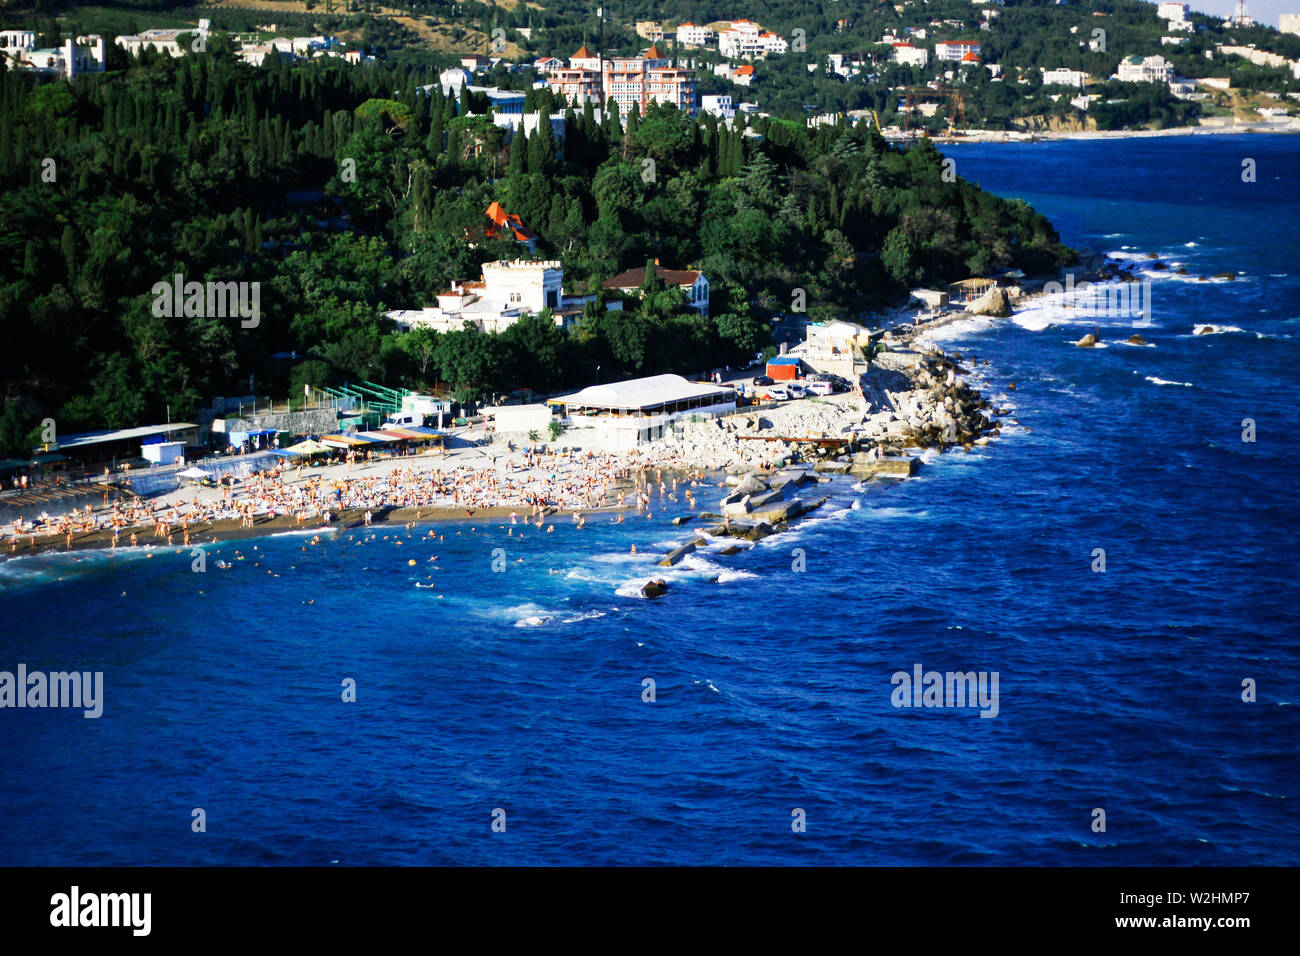 Top view, view of the Black Sea coast during a storm beach full of tourists and rubbish. Tourist area. Beaches by the sea. Post-Soviet space. Stock Photo